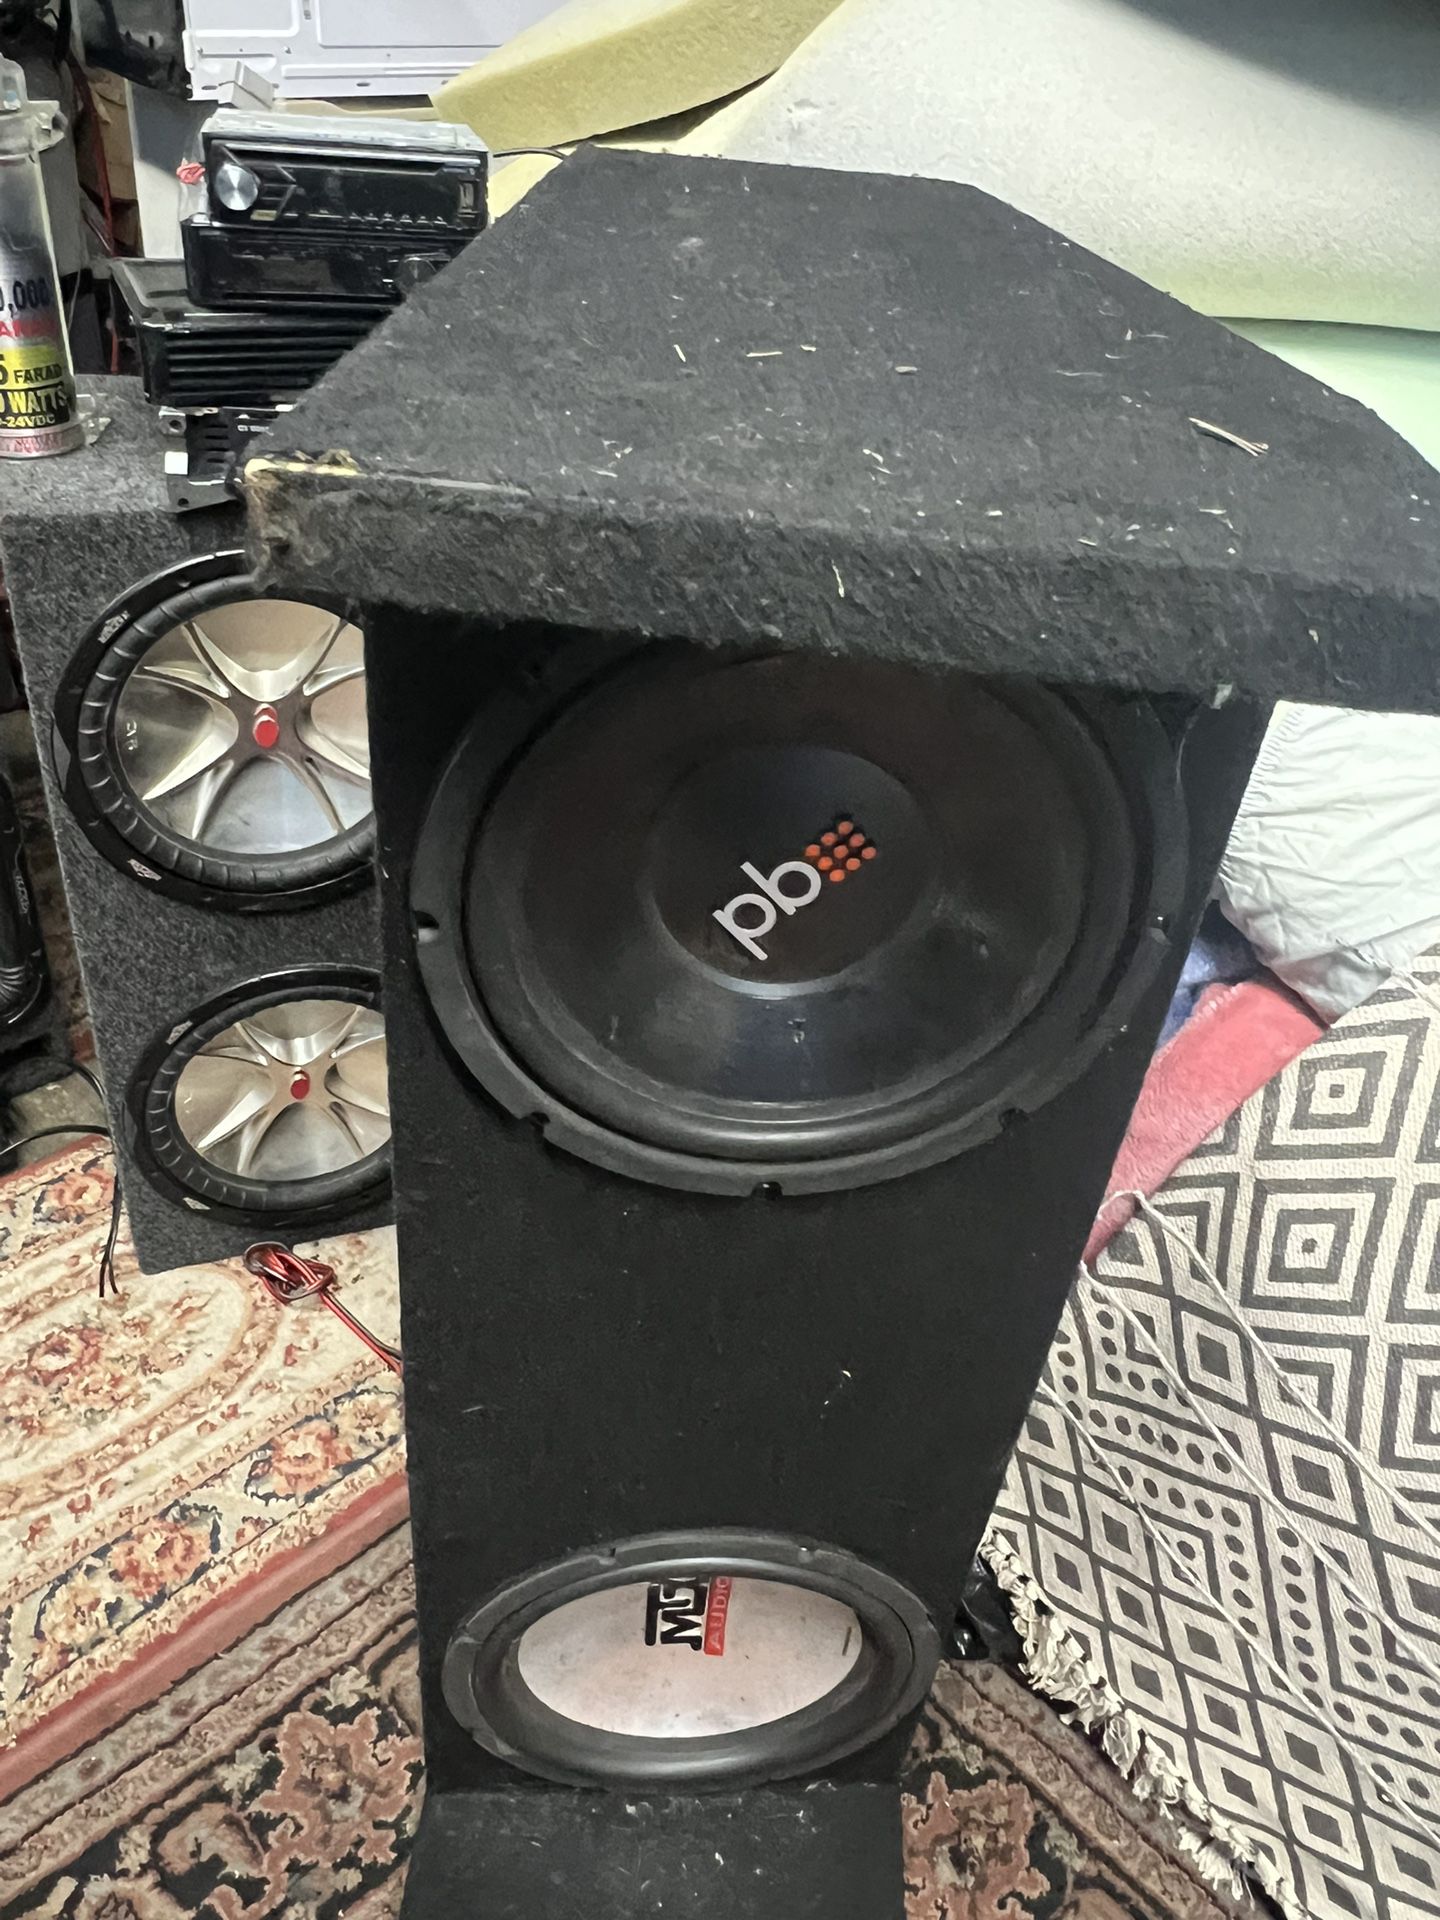 Pionner And More Speakers And Amplifier